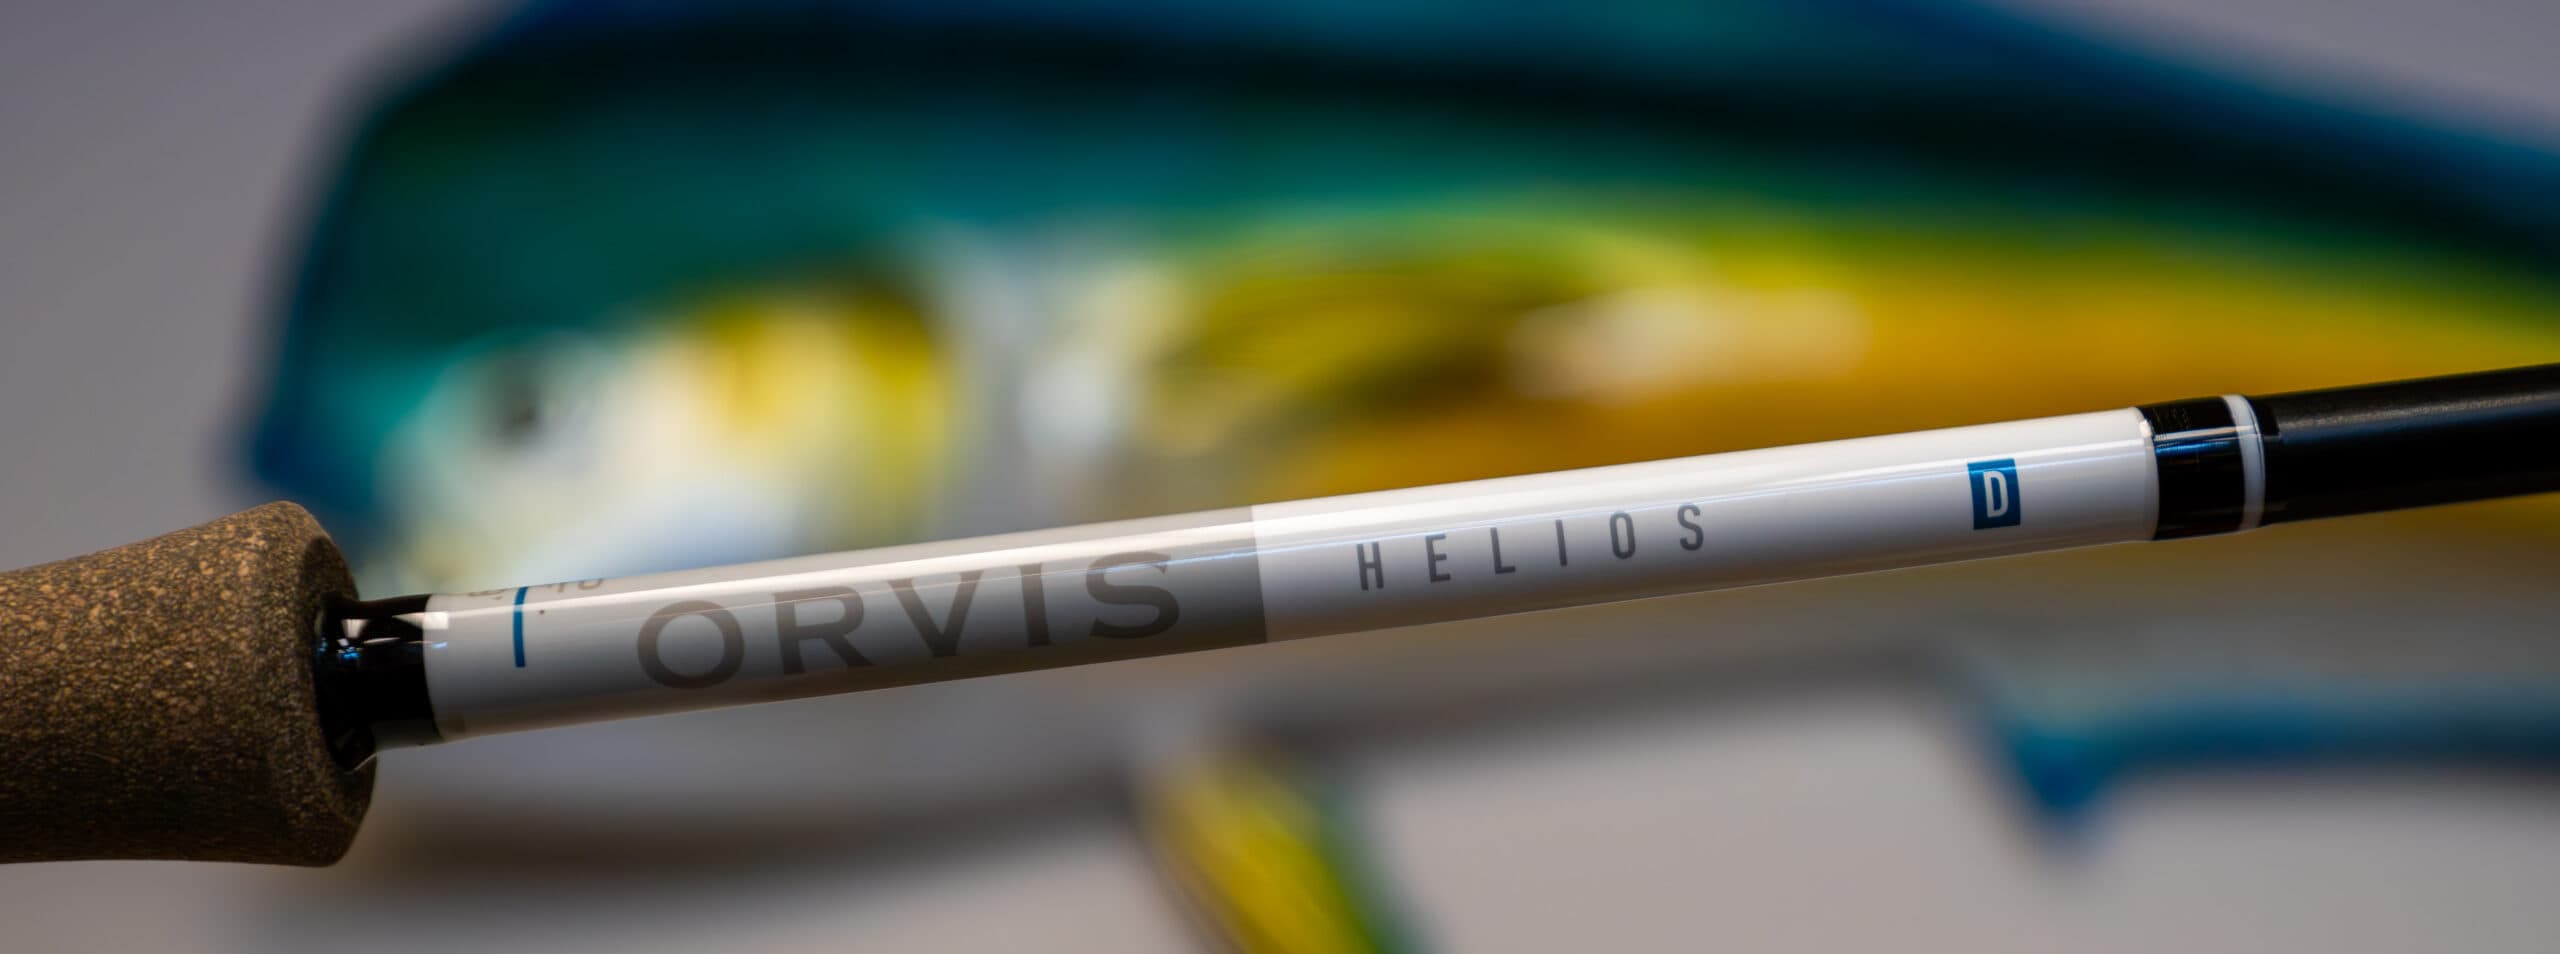 Orvis Helios D, An Intro Into Perfection.